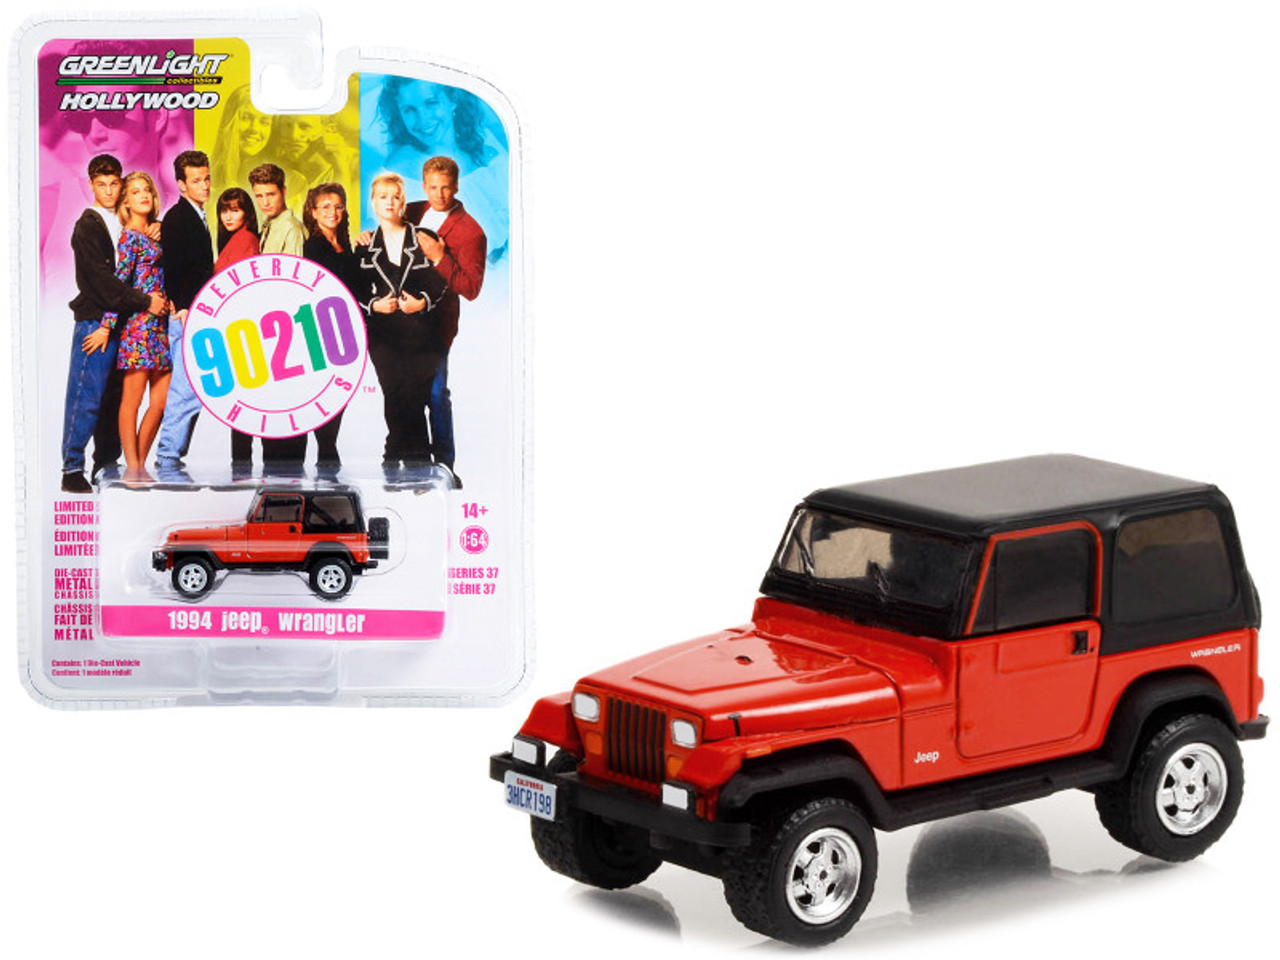 1994 Jeep Wrangler Red with Black Top "Beverly Hills 90210" (1990-2000) TV Series "Hollywood Series" Release 37 1/64 Diecast Model Car by Greenlight